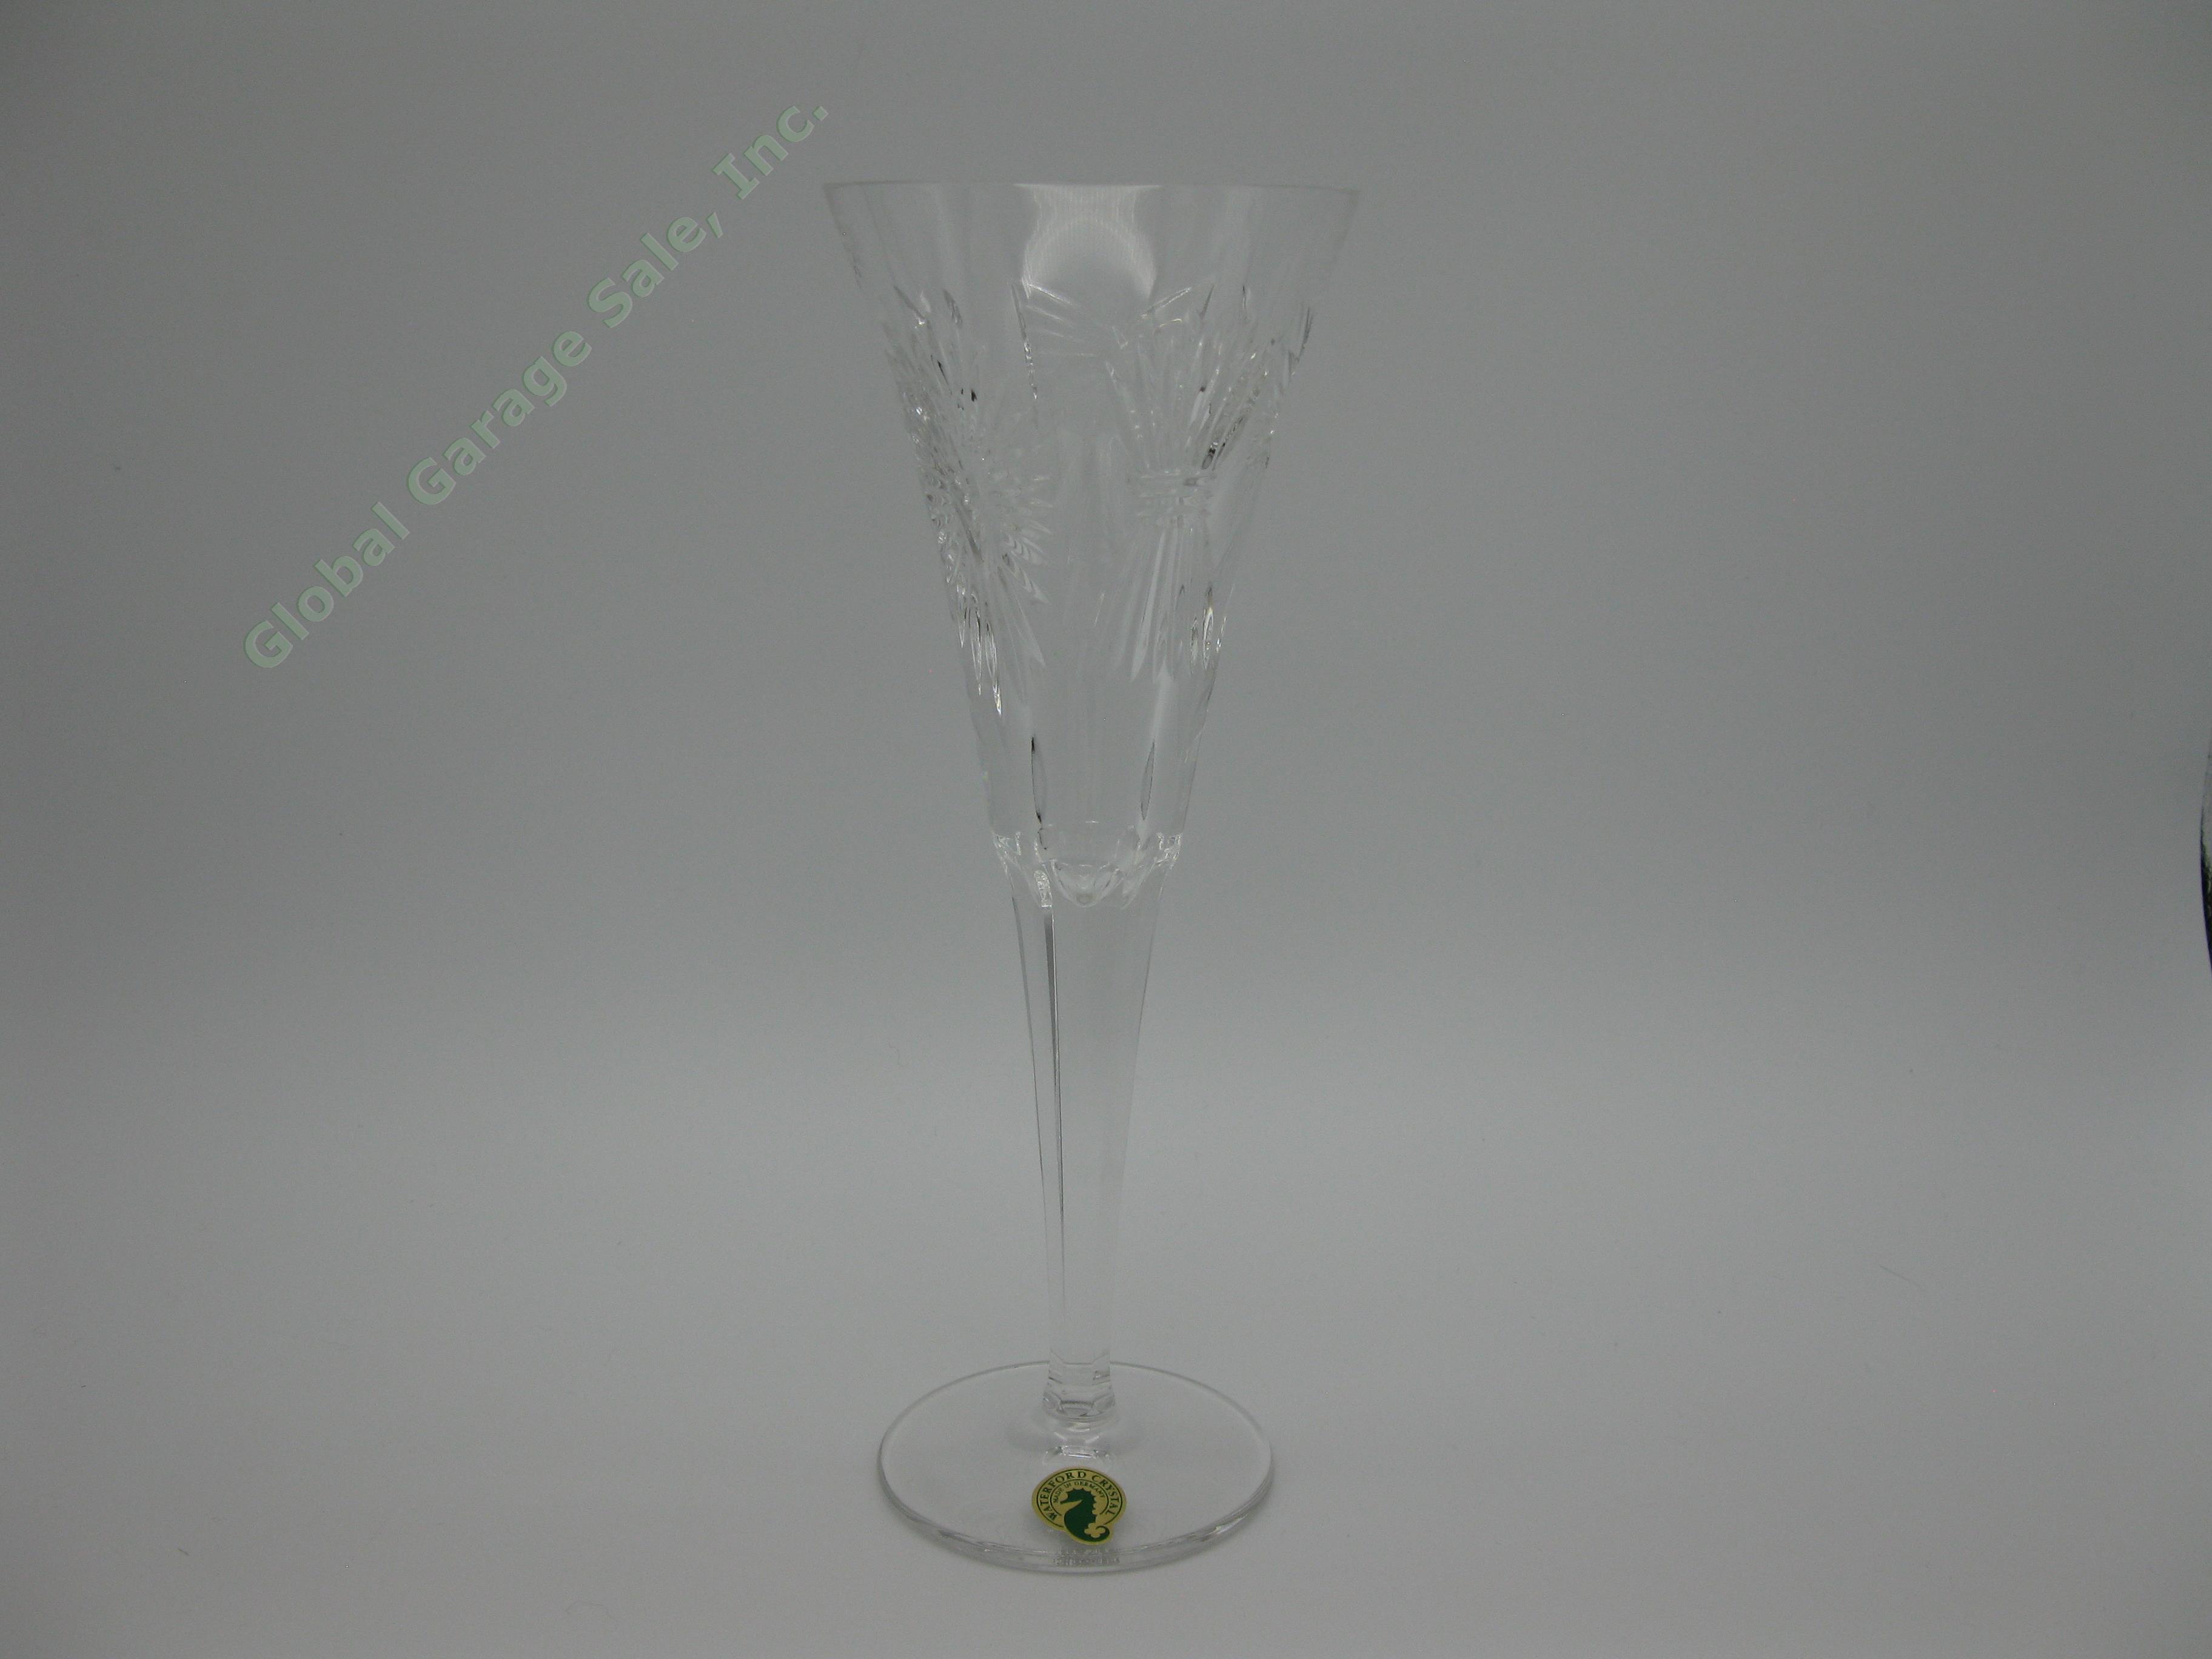 4 Waterford Crystal Millennium Universal-5 Toasting Flute Champagne Glasses NR! 6